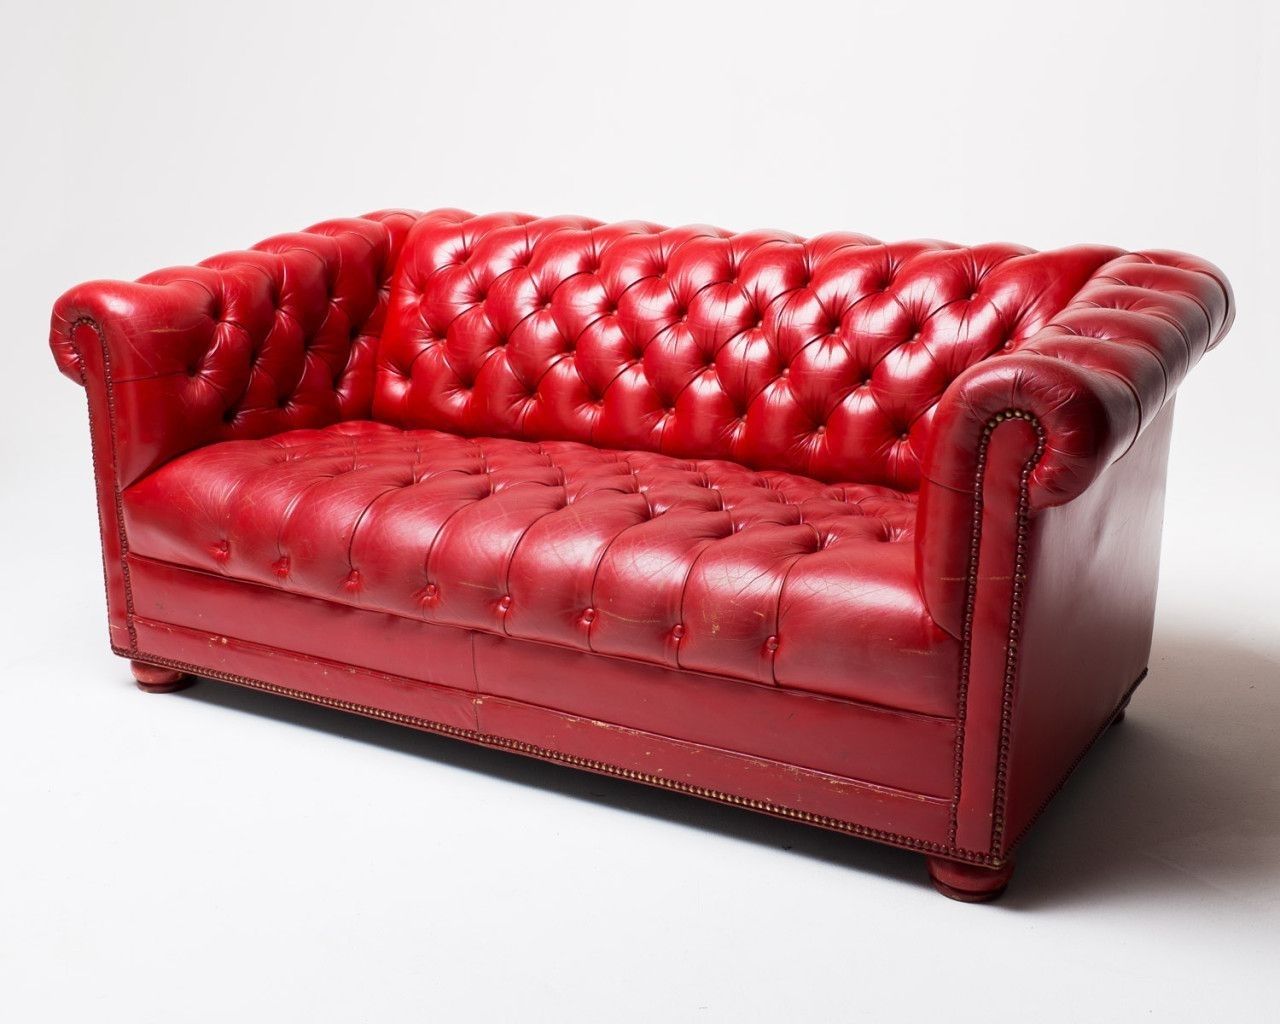 Incredible Co Red Leather Sofa Acme Studio Picture Of Inspiration Inside Red Leather Sofas (View 3 of 10)